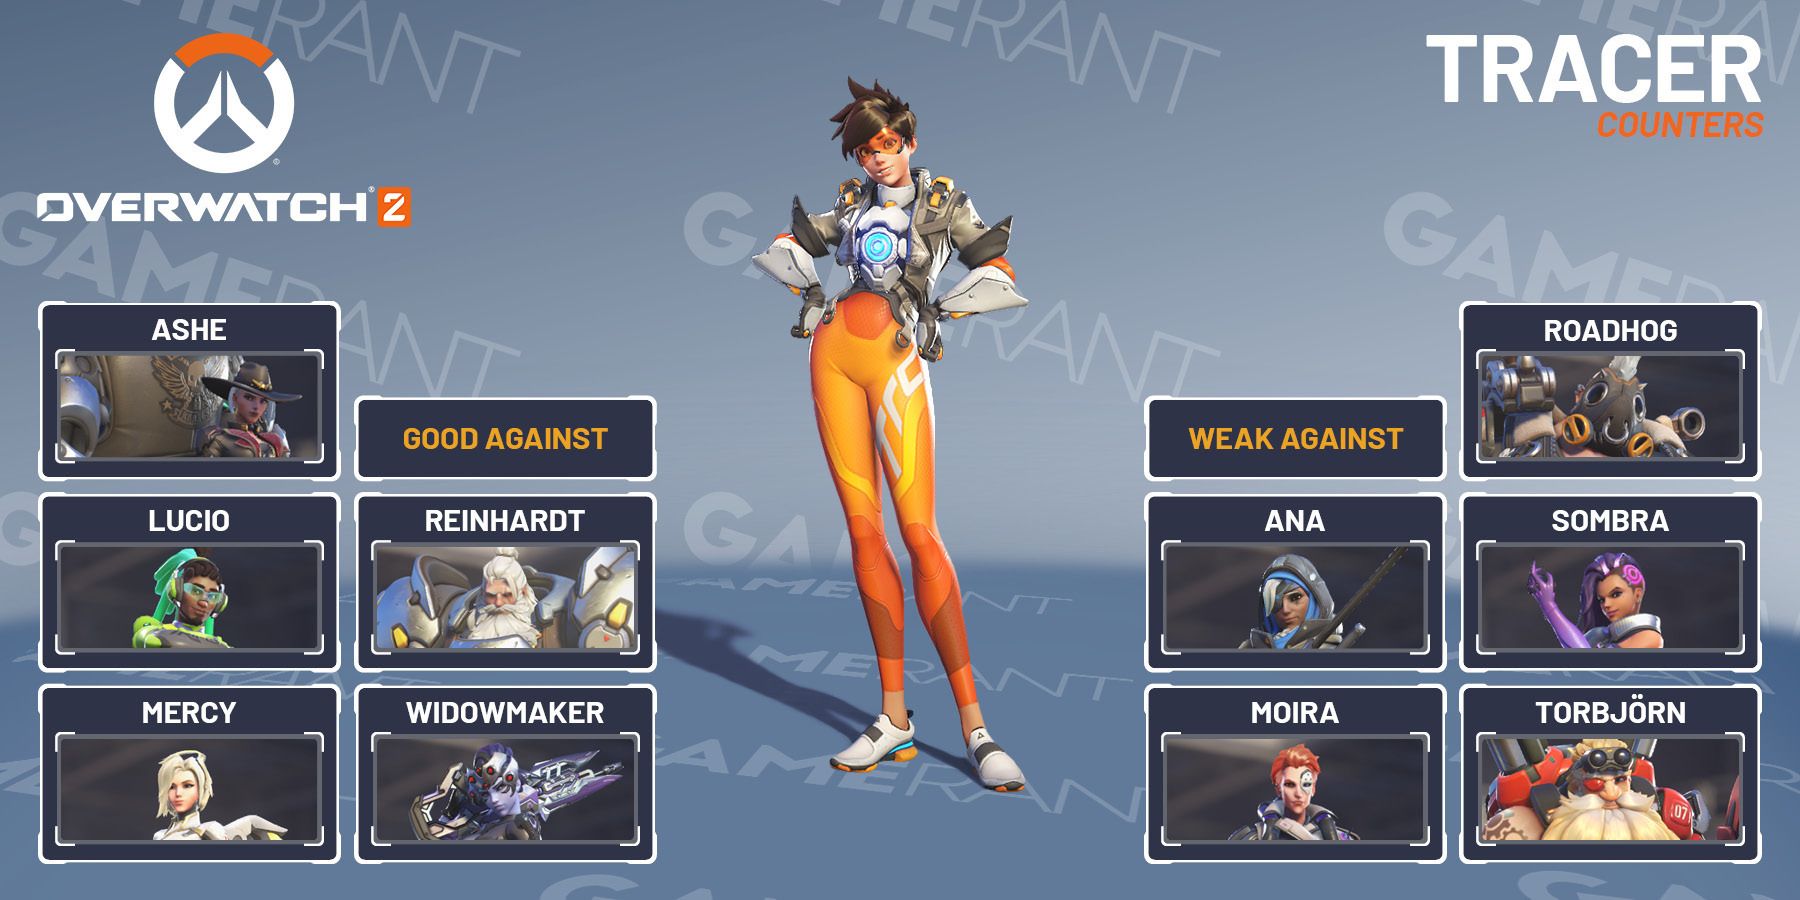 Overwatch 2 Tracer Counters guide